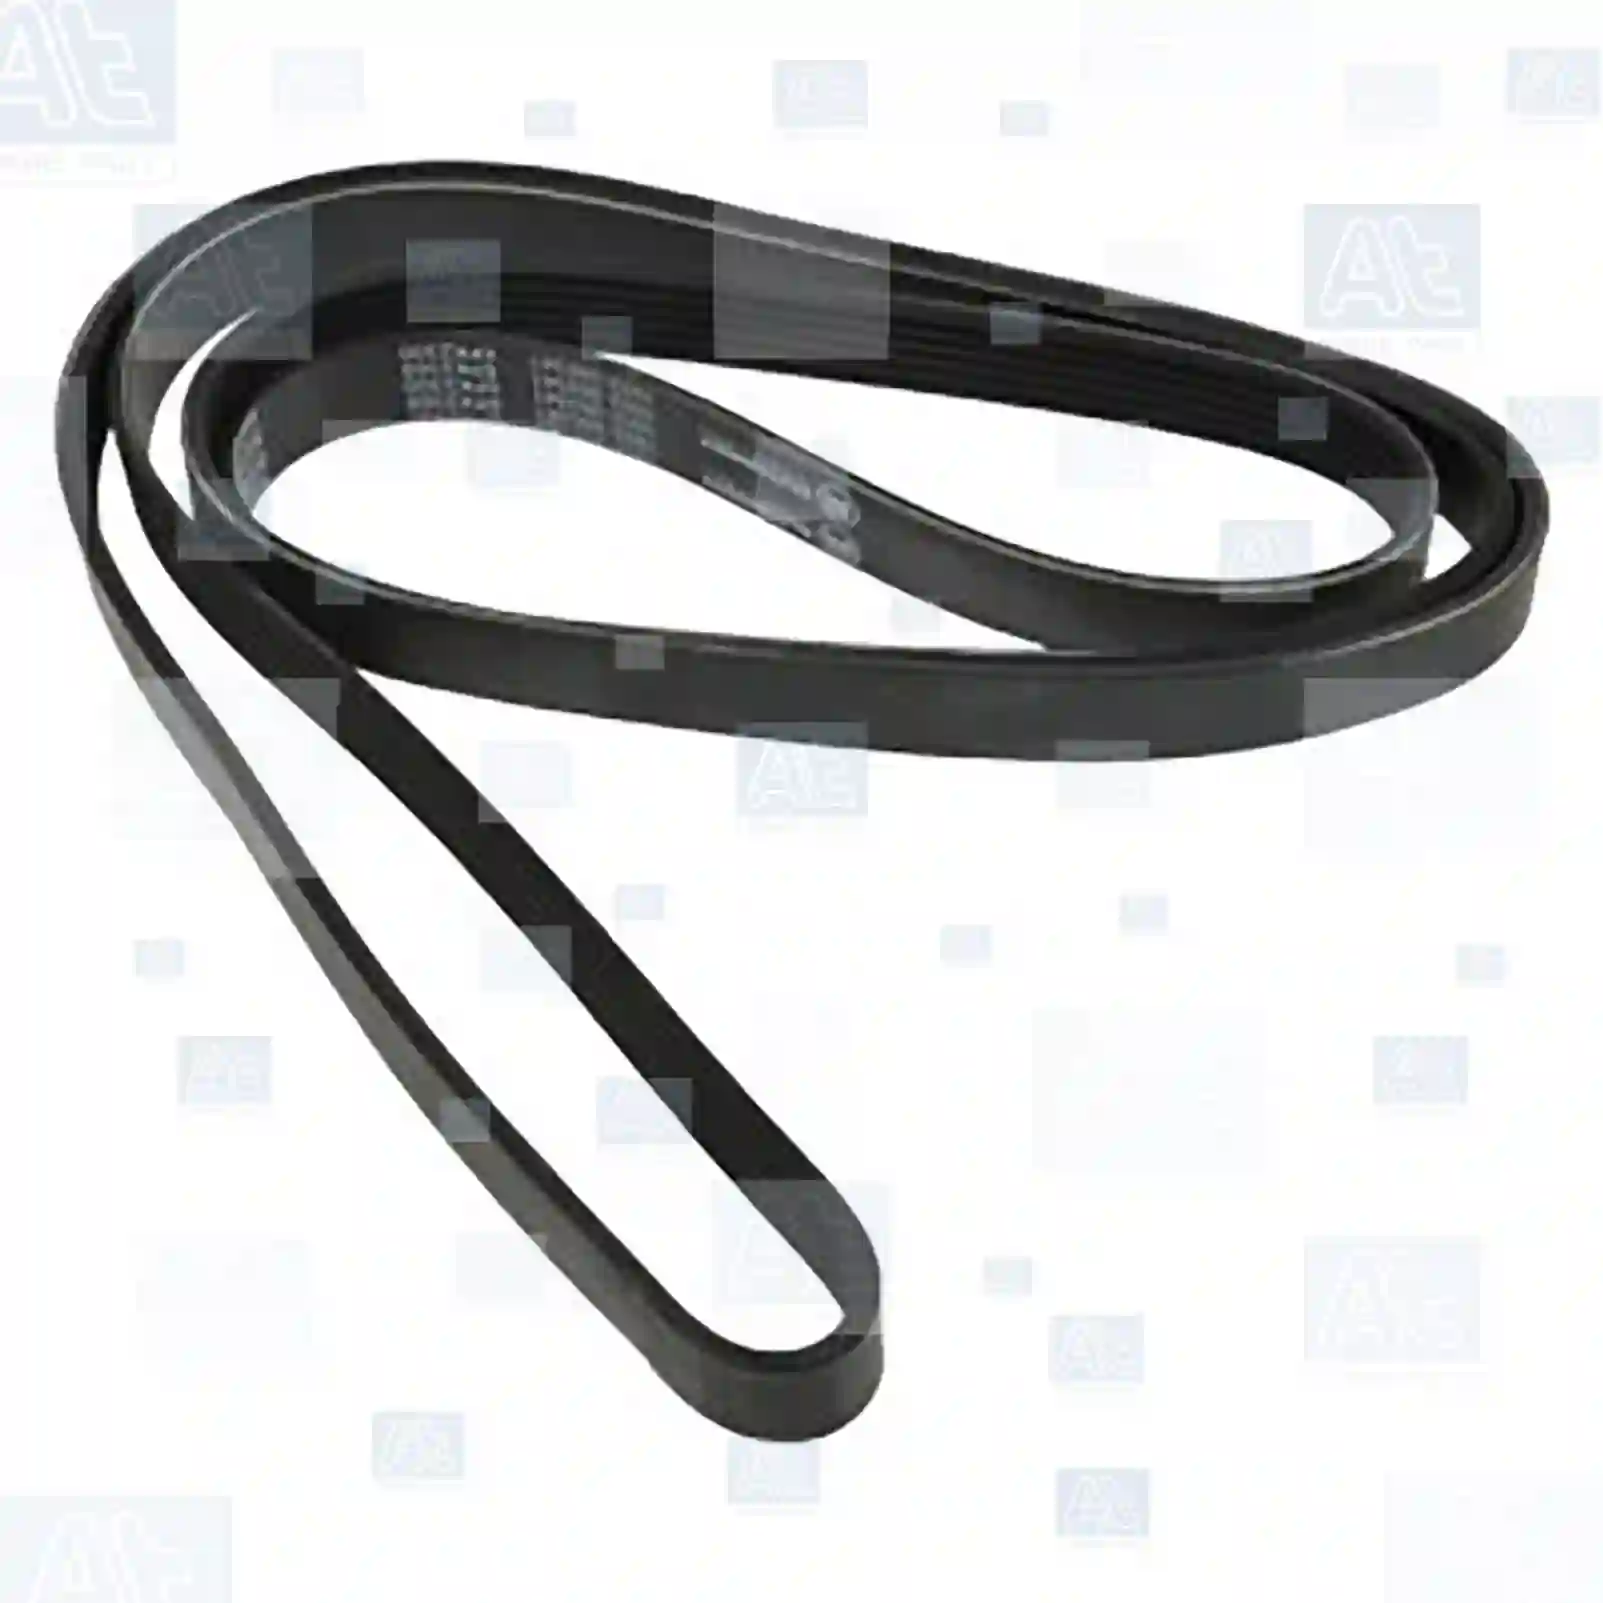 Multiribbed belt, 77709167, 06B903137J, 06D903137A, 06D903137C, 06D903137E, 00017351939, 1735193, 1735195, 1738991, 11281735195, 11281738991, 11287516621, 5086571AA, 3102145, 71719559, 1040760, 7239510, 504032642, 71719559, 6659970292, 06D903137A, 06D903137C, 06D903137E, 06B903137J, 06D903137A, 06D903137C, 06D903137E, ZG01652-0008 ||  77709167 At Spare Part | Engine, Accelerator Pedal, Camshaft, Connecting Rod, Crankcase, Crankshaft, Cylinder Head, Engine Suspension Mountings, Exhaust Manifold, Exhaust Gas Recirculation, Filter Kits, Flywheel Housing, General Overhaul Kits, Engine, Intake Manifold, Oil Cleaner, Oil Cooler, Oil Filter, Oil Pump, Oil Sump, Piston & Liner, Sensor & Switch, Timing Case, Turbocharger, Cooling System, Belt Tensioner, Coolant Filter, Coolant Pipe, Corrosion Prevention Agent, Drive, Expansion Tank, Fan, Intercooler, Monitors & Gauges, Radiator, Thermostat, V-Belt / Timing belt, Water Pump, Fuel System, Electronical Injector Unit, Feed Pump, Fuel Filter, cpl., Fuel Gauge Sender,  Fuel Line, Fuel Pump, Fuel Tank, Injection Line Kit, Injection Pump, Exhaust System, Clutch & Pedal, Gearbox, Propeller Shaft, Axles, Brake System, Hubs & Wheels, Suspension, Leaf Spring, Universal Parts / Accessories, Steering, Electrical System, Cabin Multiribbed belt, 77709167, 06B903137J, 06D903137A, 06D903137C, 06D903137E, 00017351939, 1735193, 1735195, 1738991, 11281735195, 11281738991, 11287516621, 5086571AA, 3102145, 71719559, 1040760, 7239510, 504032642, 71719559, 6659970292, 06D903137A, 06D903137C, 06D903137E, 06B903137J, 06D903137A, 06D903137C, 06D903137E, ZG01652-0008 ||  77709167 At Spare Part | Engine, Accelerator Pedal, Camshaft, Connecting Rod, Crankcase, Crankshaft, Cylinder Head, Engine Suspension Mountings, Exhaust Manifold, Exhaust Gas Recirculation, Filter Kits, Flywheel Housing, General Overhaul Kits, Engine, Intake Manifold, Oil Cleaner, Oil Cooler, Oil Filter, Oil Pump, Oil Sump, Piston & Liner, Sensor & Switch, Timing Case, Turbocharger, Cooling System, Belt Tensioner, Coolant Filter, Coolant Pipe, Corrosion Prevention Agent, Drive, Expansion Tank, Fan, Intercooler, Monitors & Gauges, Radiator, Thermostat, V-Belt / Timing belt, Water Pump, Fuel System, Electronical Injector Unit, Feed Pump, Fuel Filter, cpl., Fuel Gauge Sender,  Fuel Line, Fuel Pump, Fuel Tank, Injection Line Kit, Injection Pump, Exhaust System, Clutch & Pedal, Gearbox, Propeller Shaft, Axles, Brake System, Hubs & Wheels, Suspension, Leaf Spring, Universal Parts / Accessories, Steering, Electrical System, Cabin